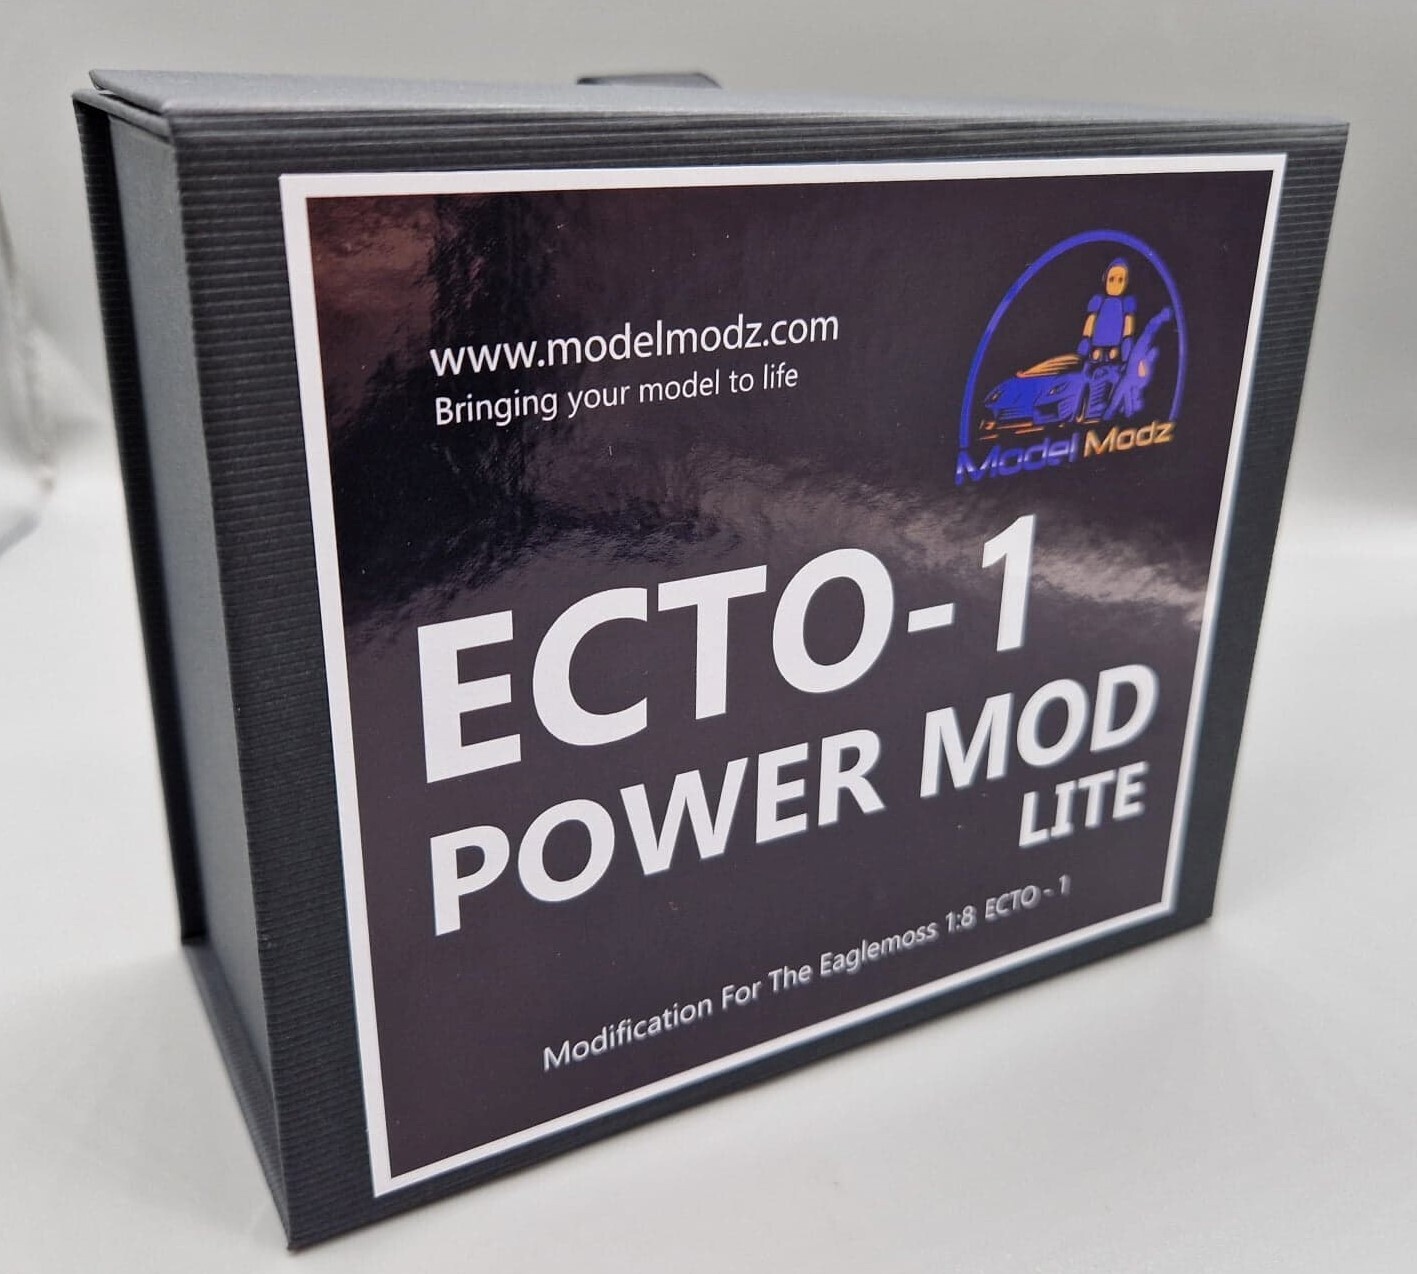 Ghostbusters 1:8 Scale Ecto-1 Power-Mod LITE